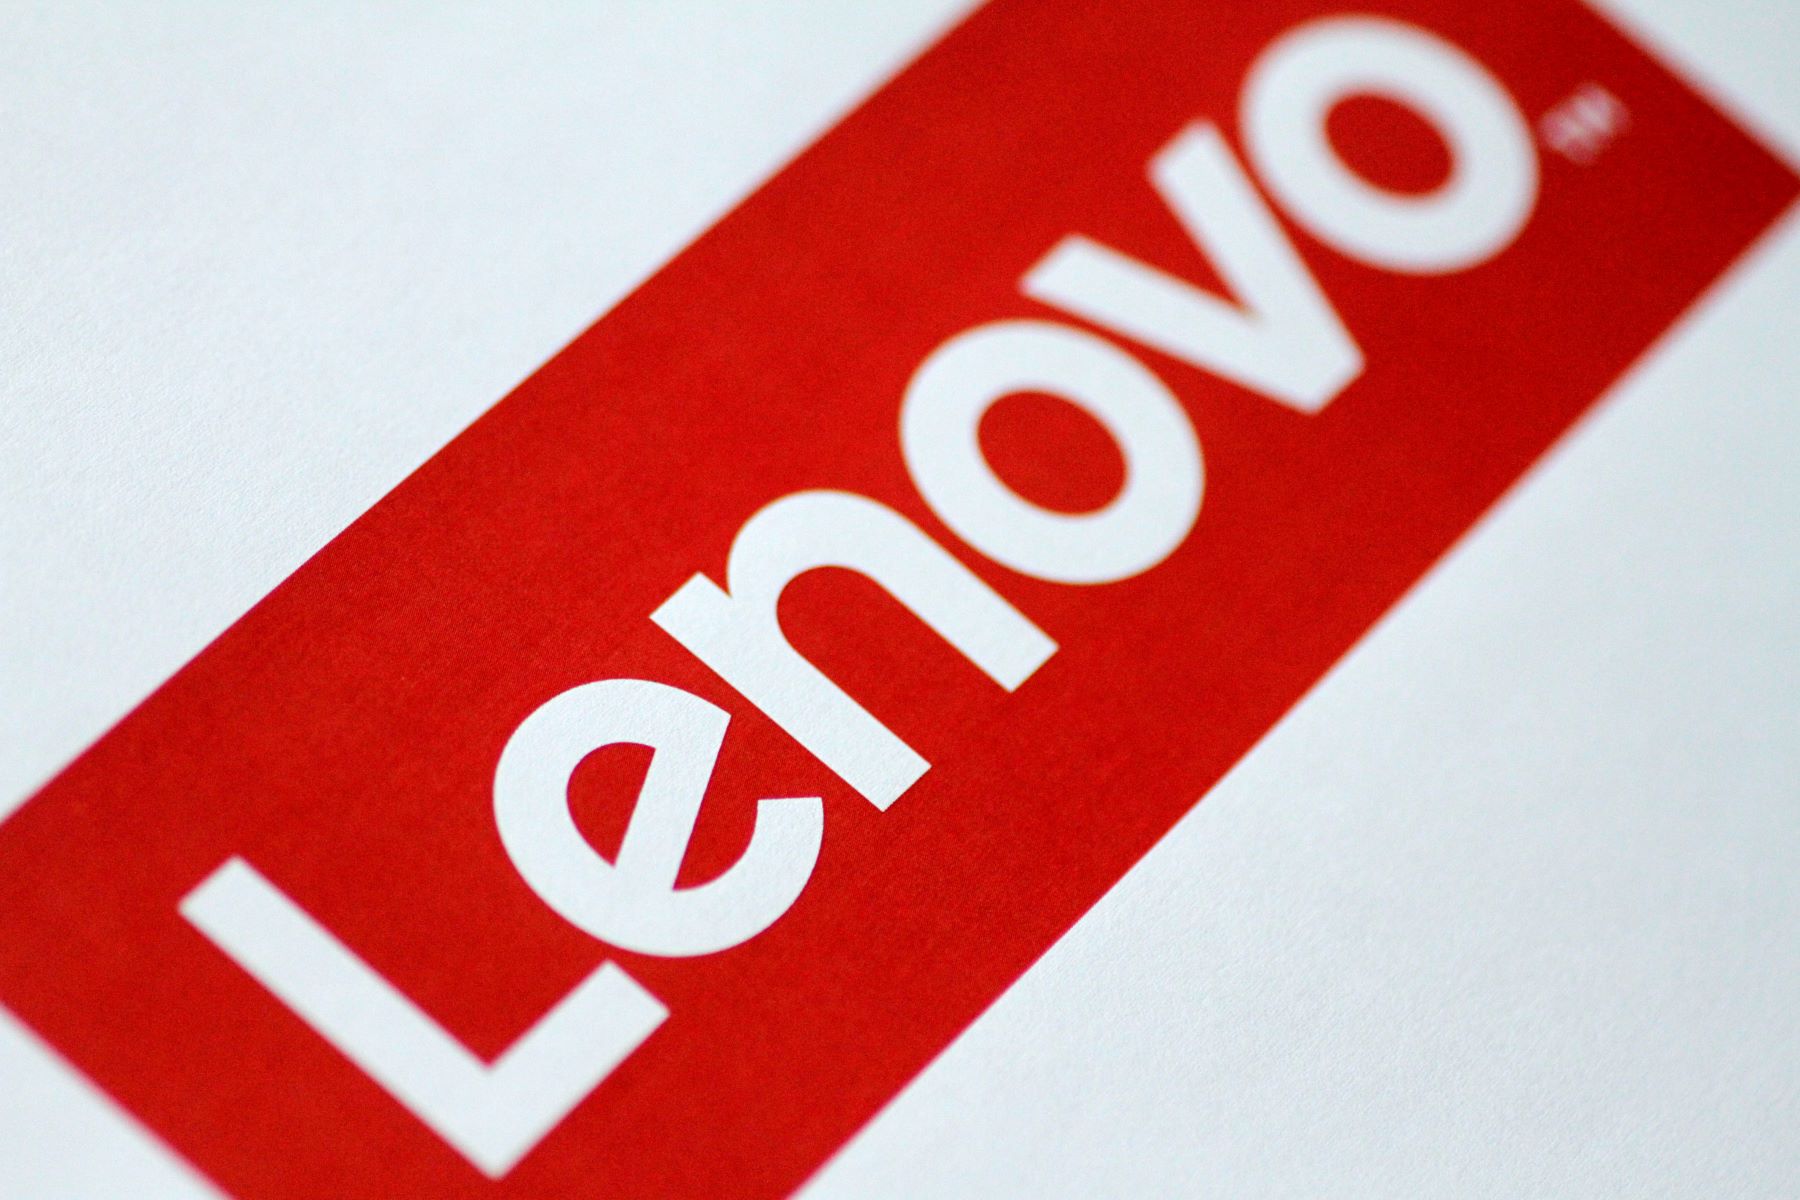 lenovo-screen-settings-turning-off-touchscreen-functionality